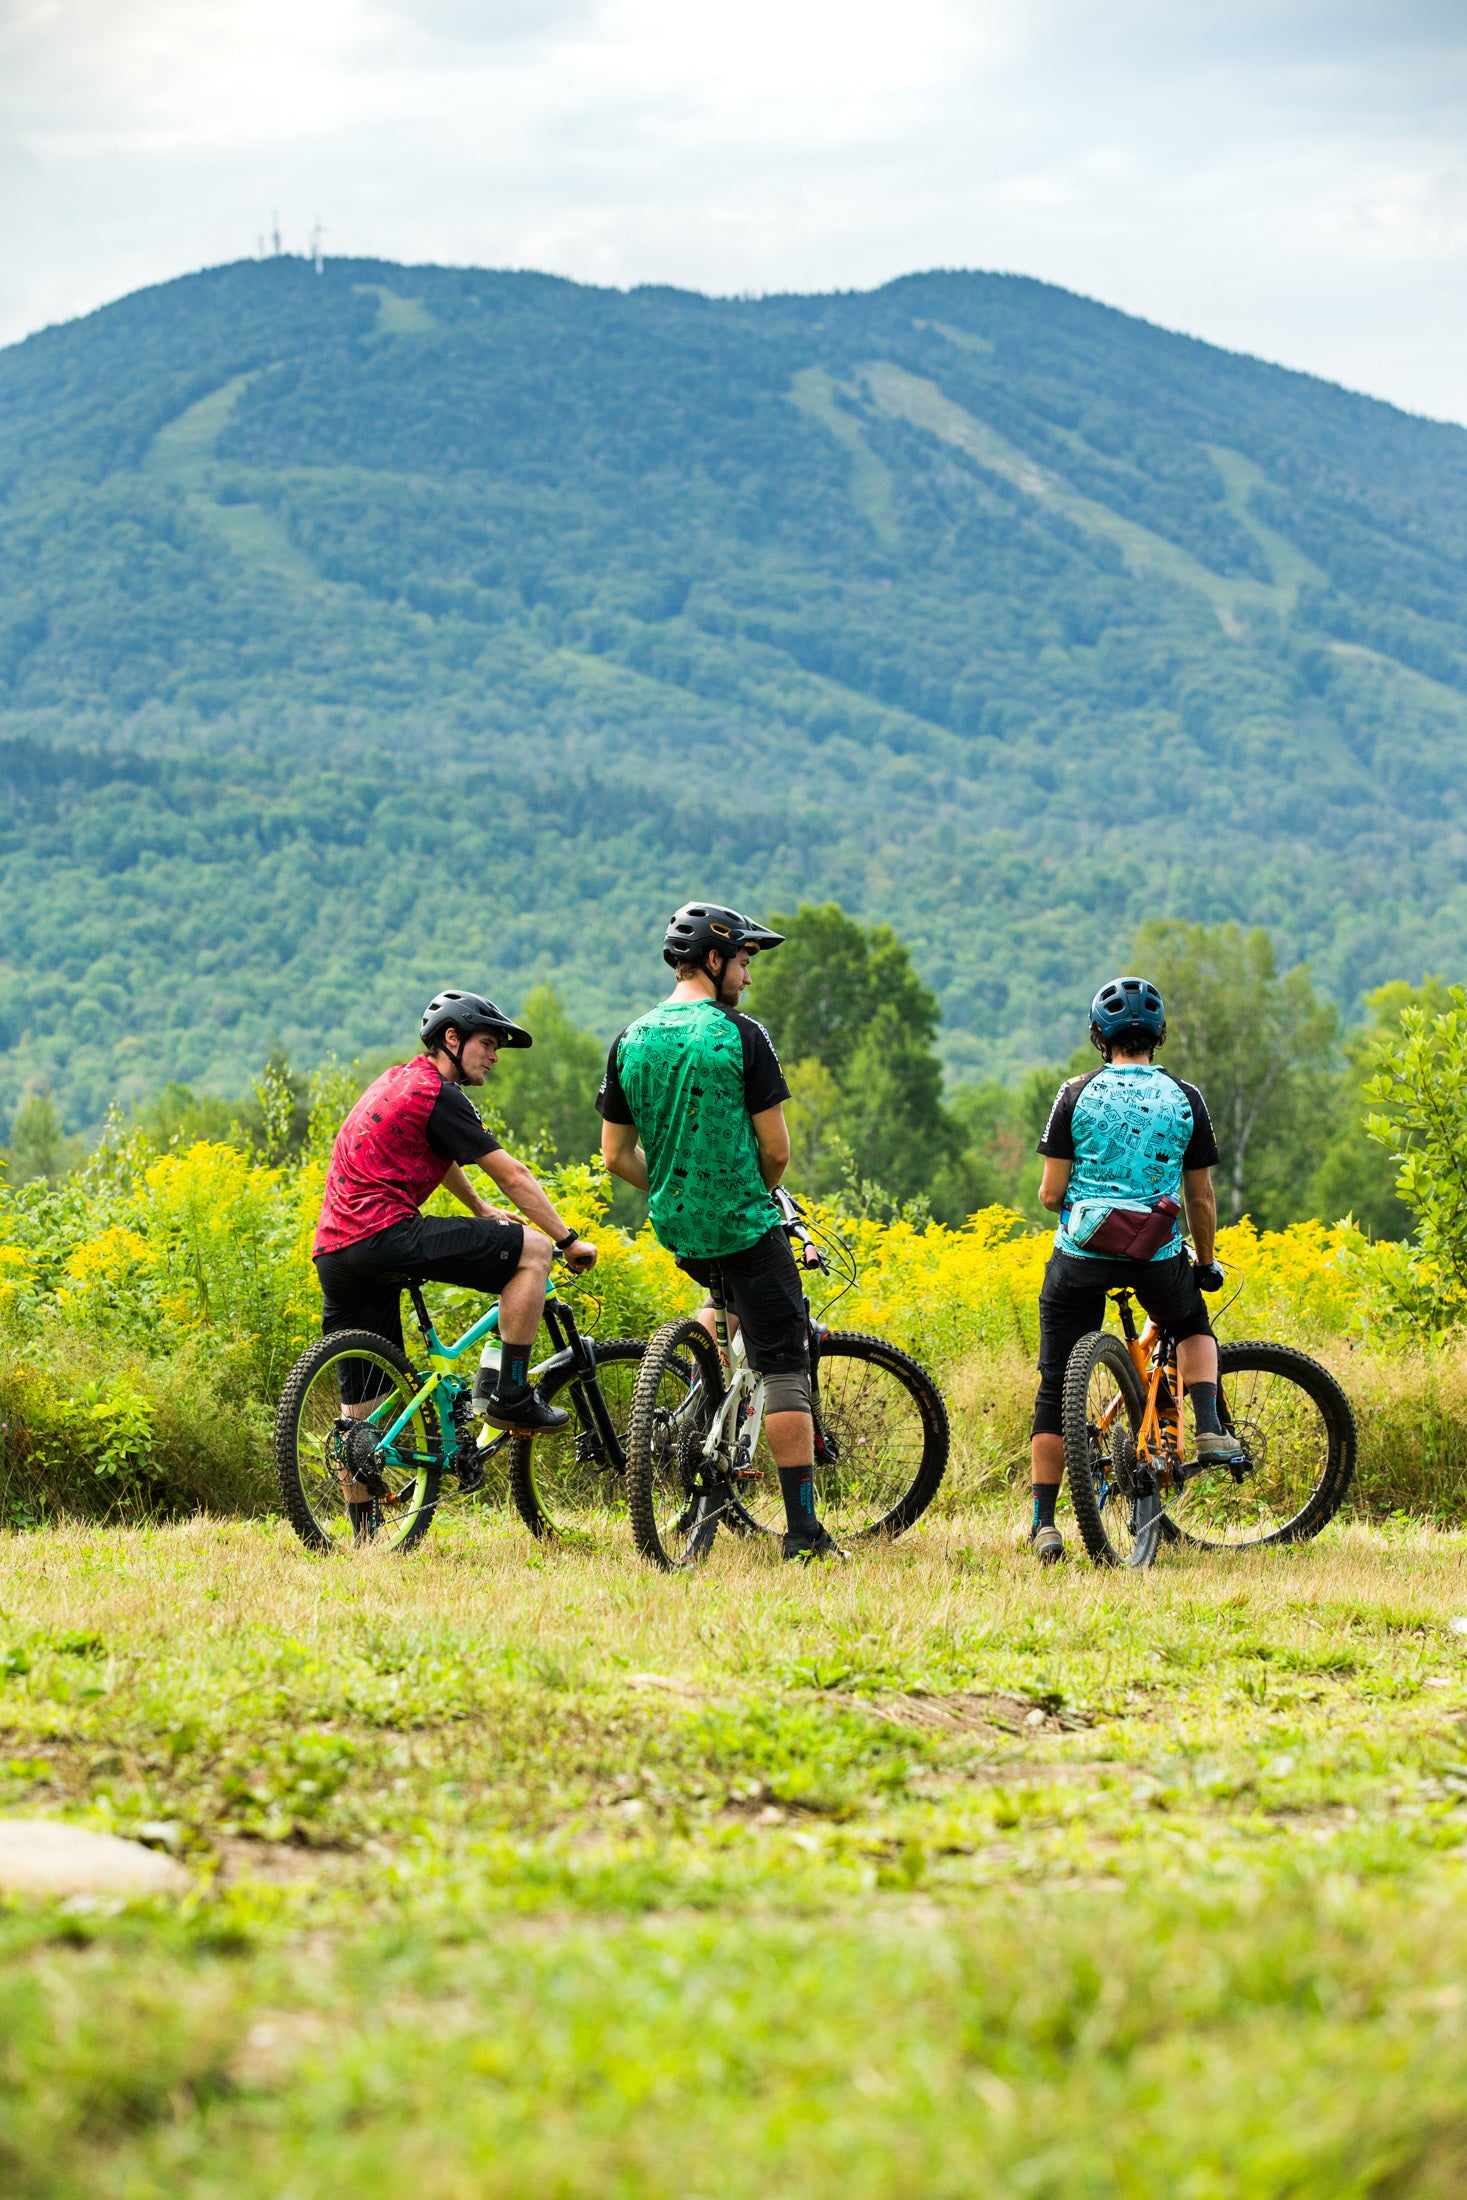 The trails are geared toward riders of all levels, from beginners to experts.